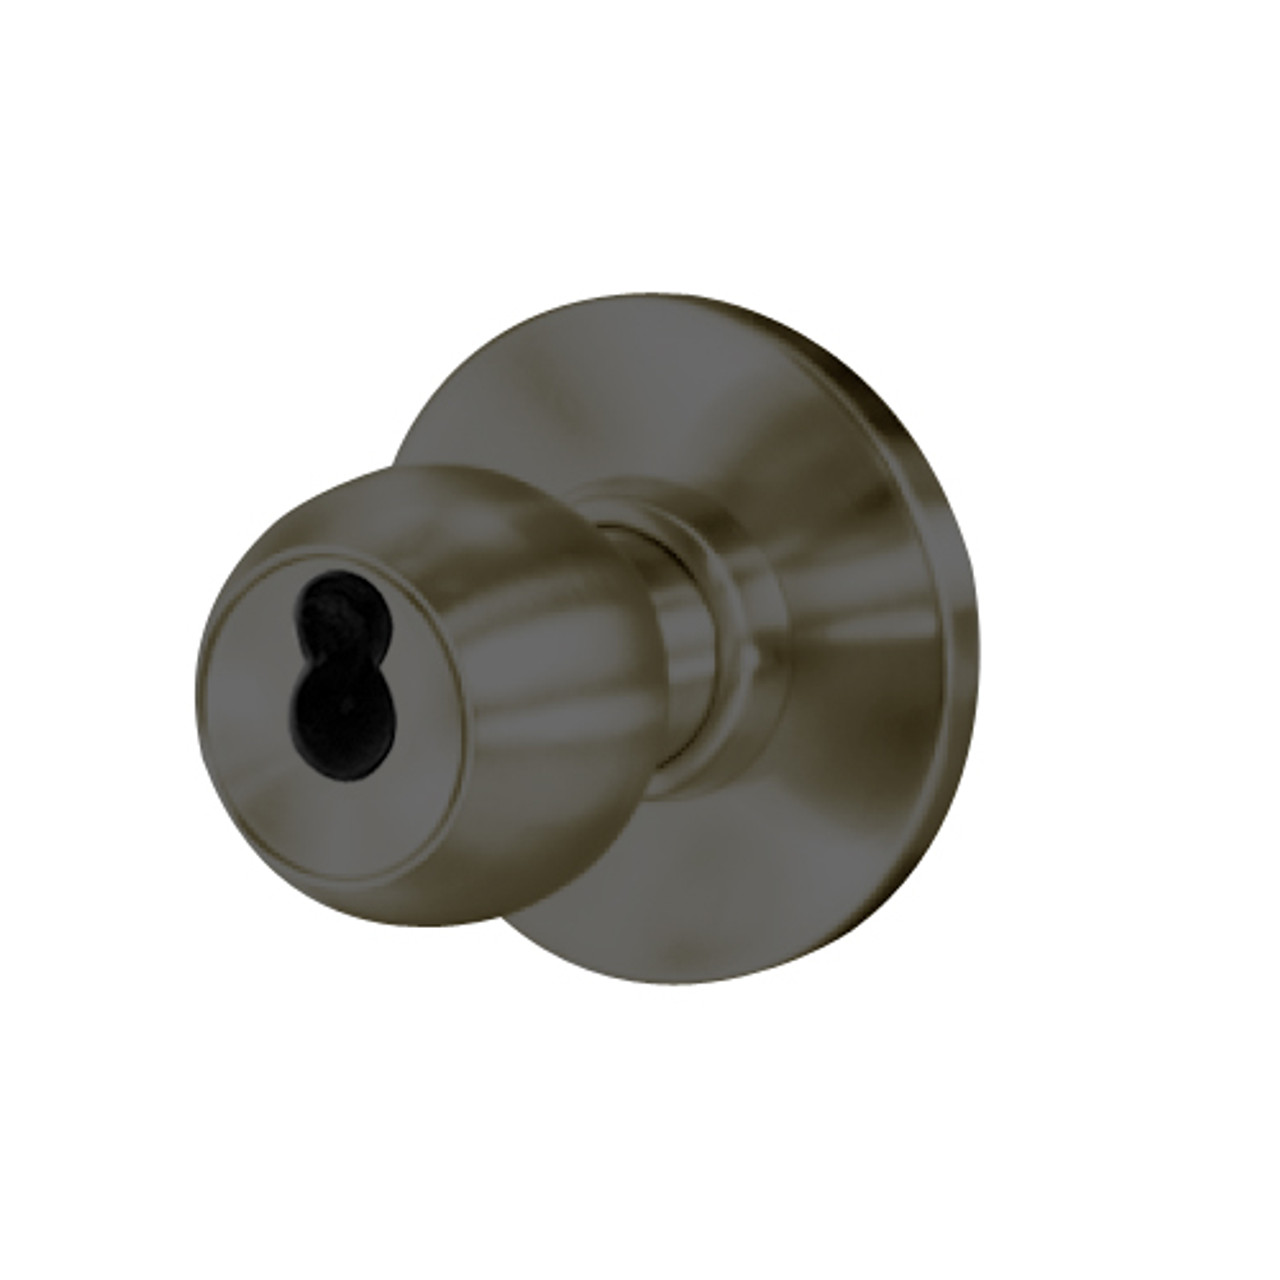 8K57YD4AS3613 Best 8K Series Exit Heavy Duty Cylindrical Knob Locks with Round Style in Oil Rubbed Bronze